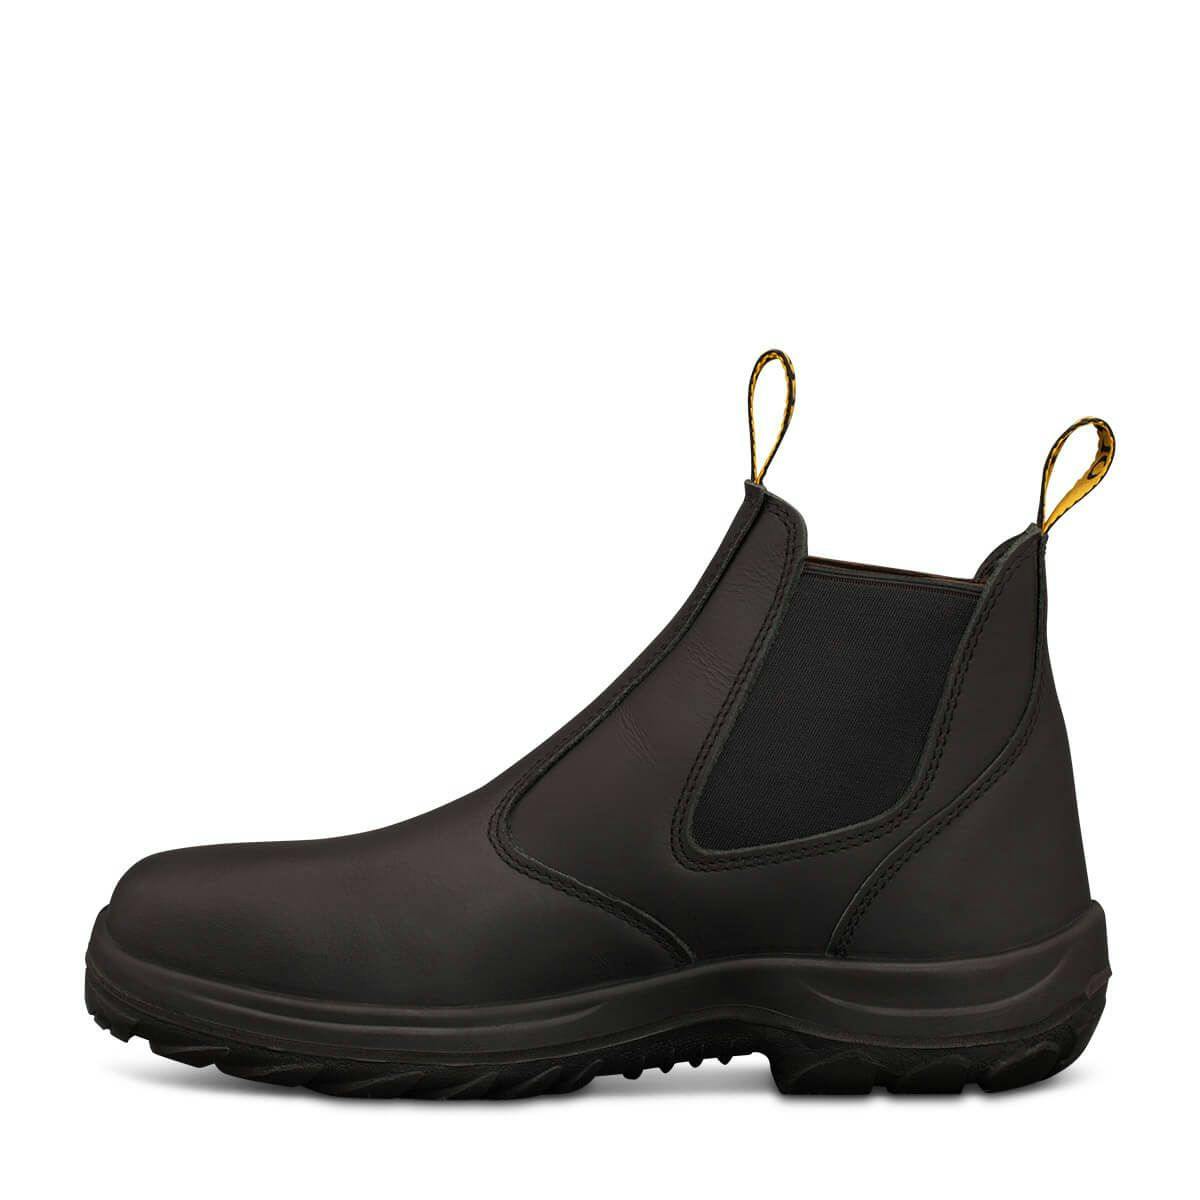 Oliver Elastic Sided Boots, Water Resistant Full Grain Leather_1